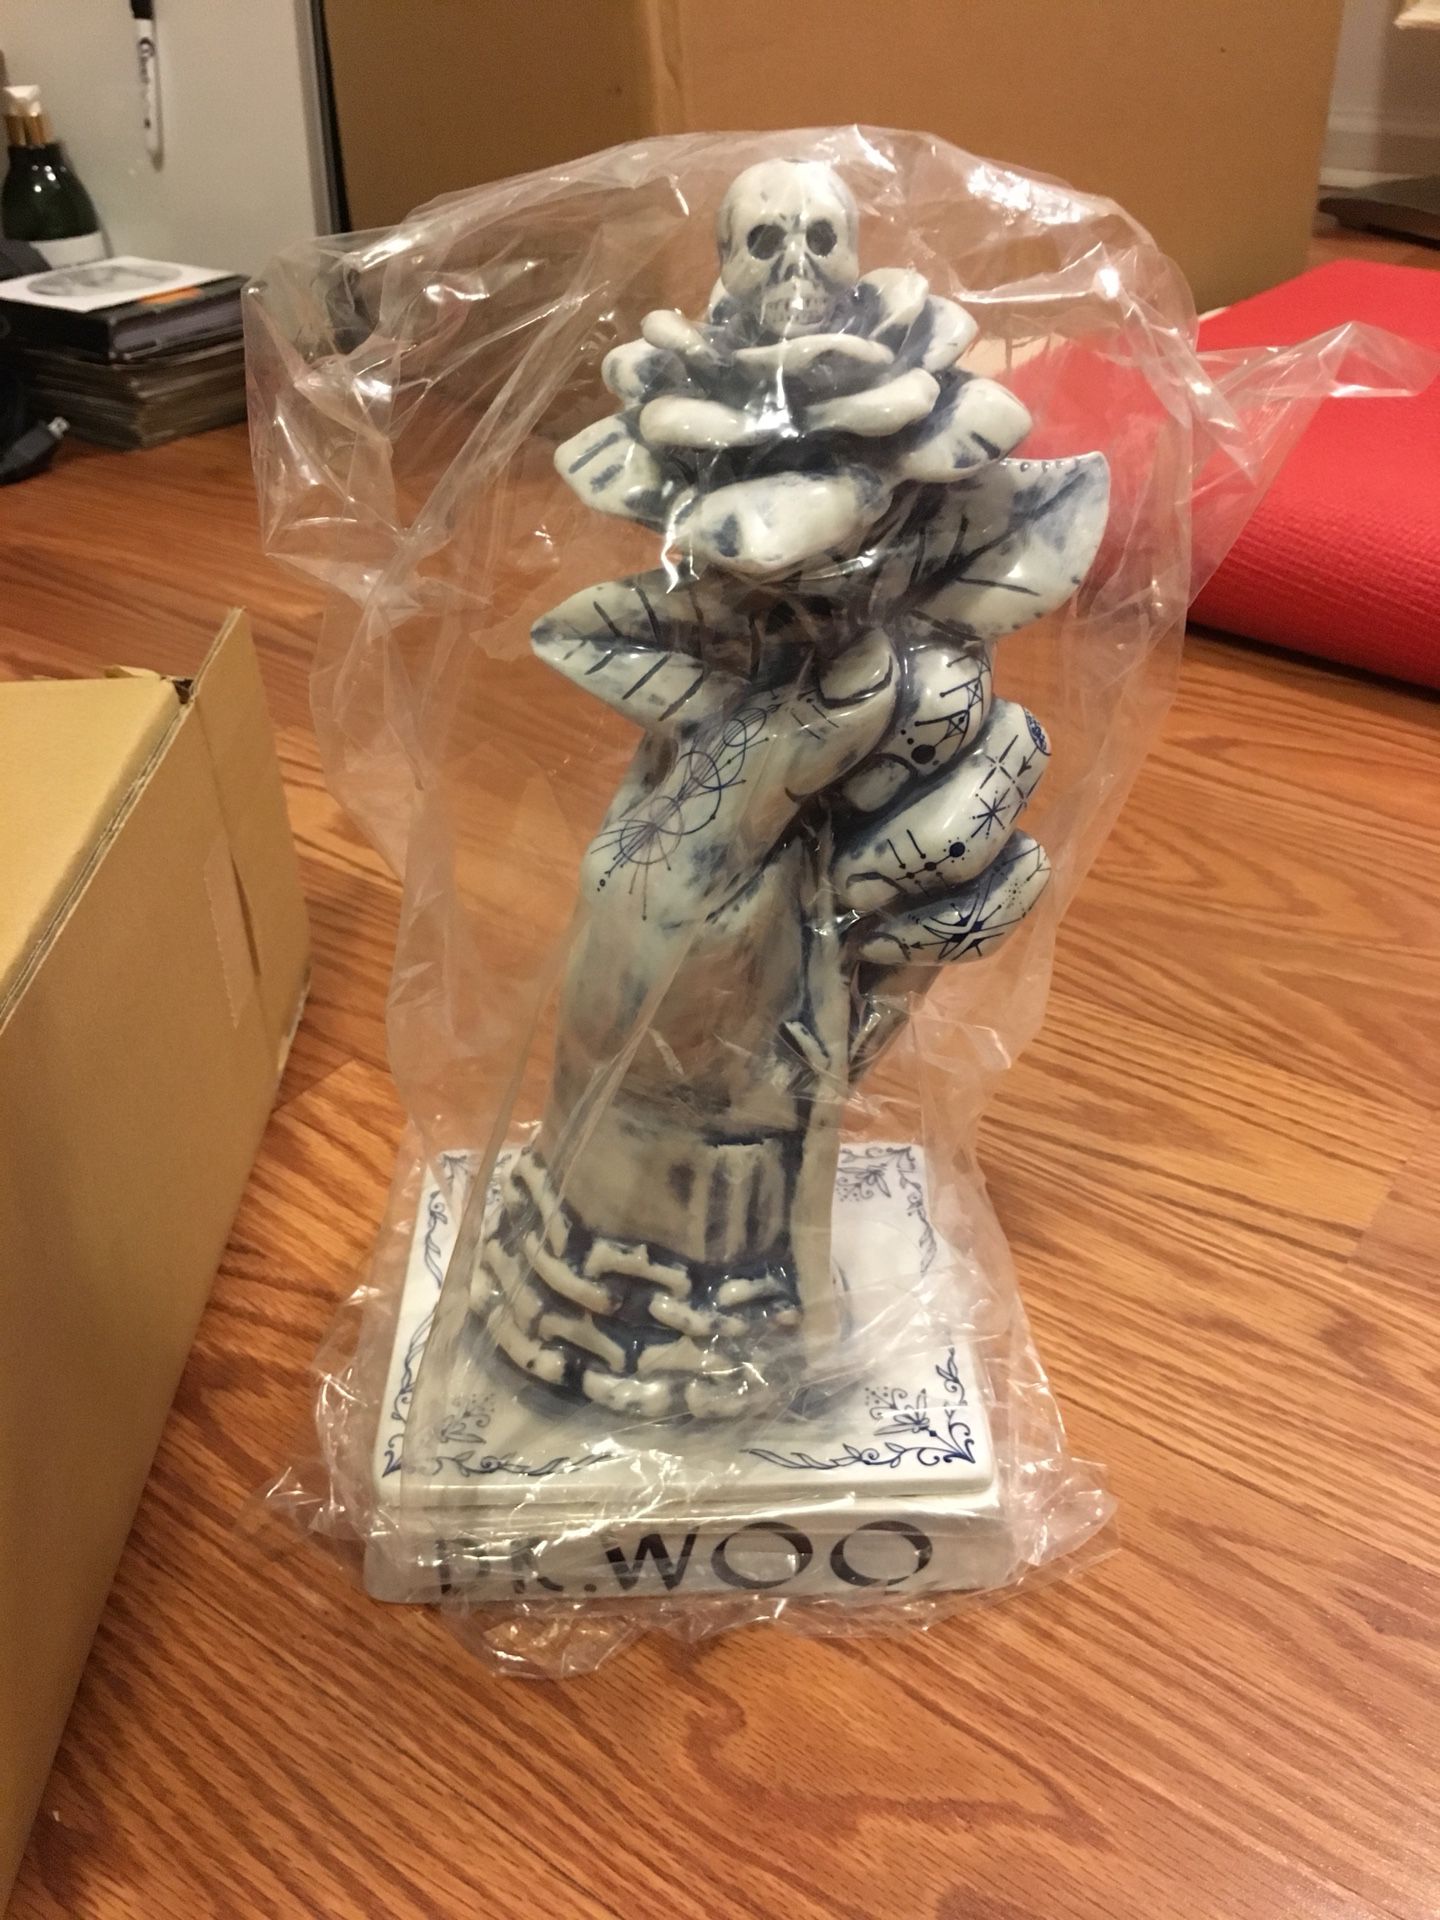 Neighborhood x Dr Woo Incense Chamber for Sale in Leonia, NJ